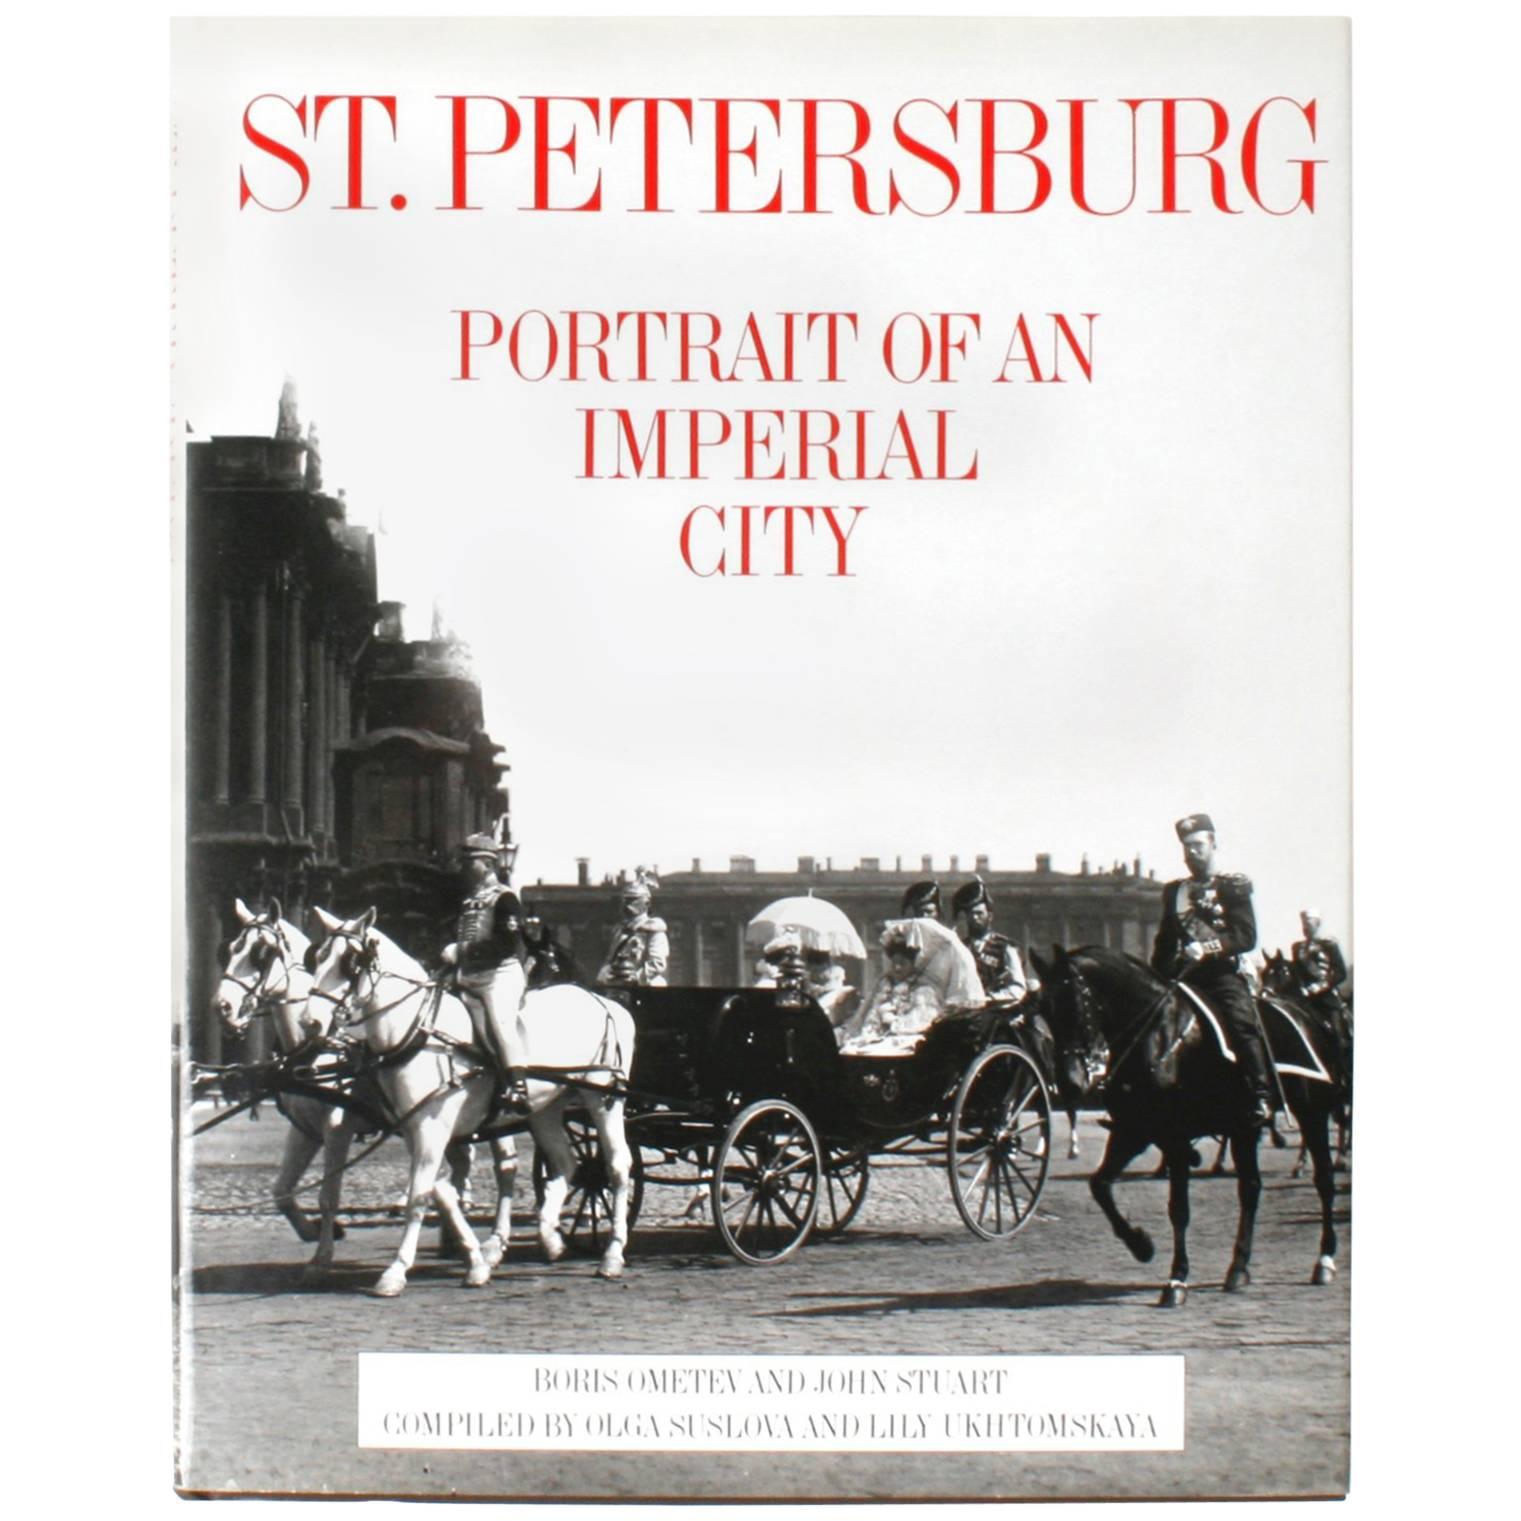 St. Petersburg, Portrait of an Imperial City, First Edition